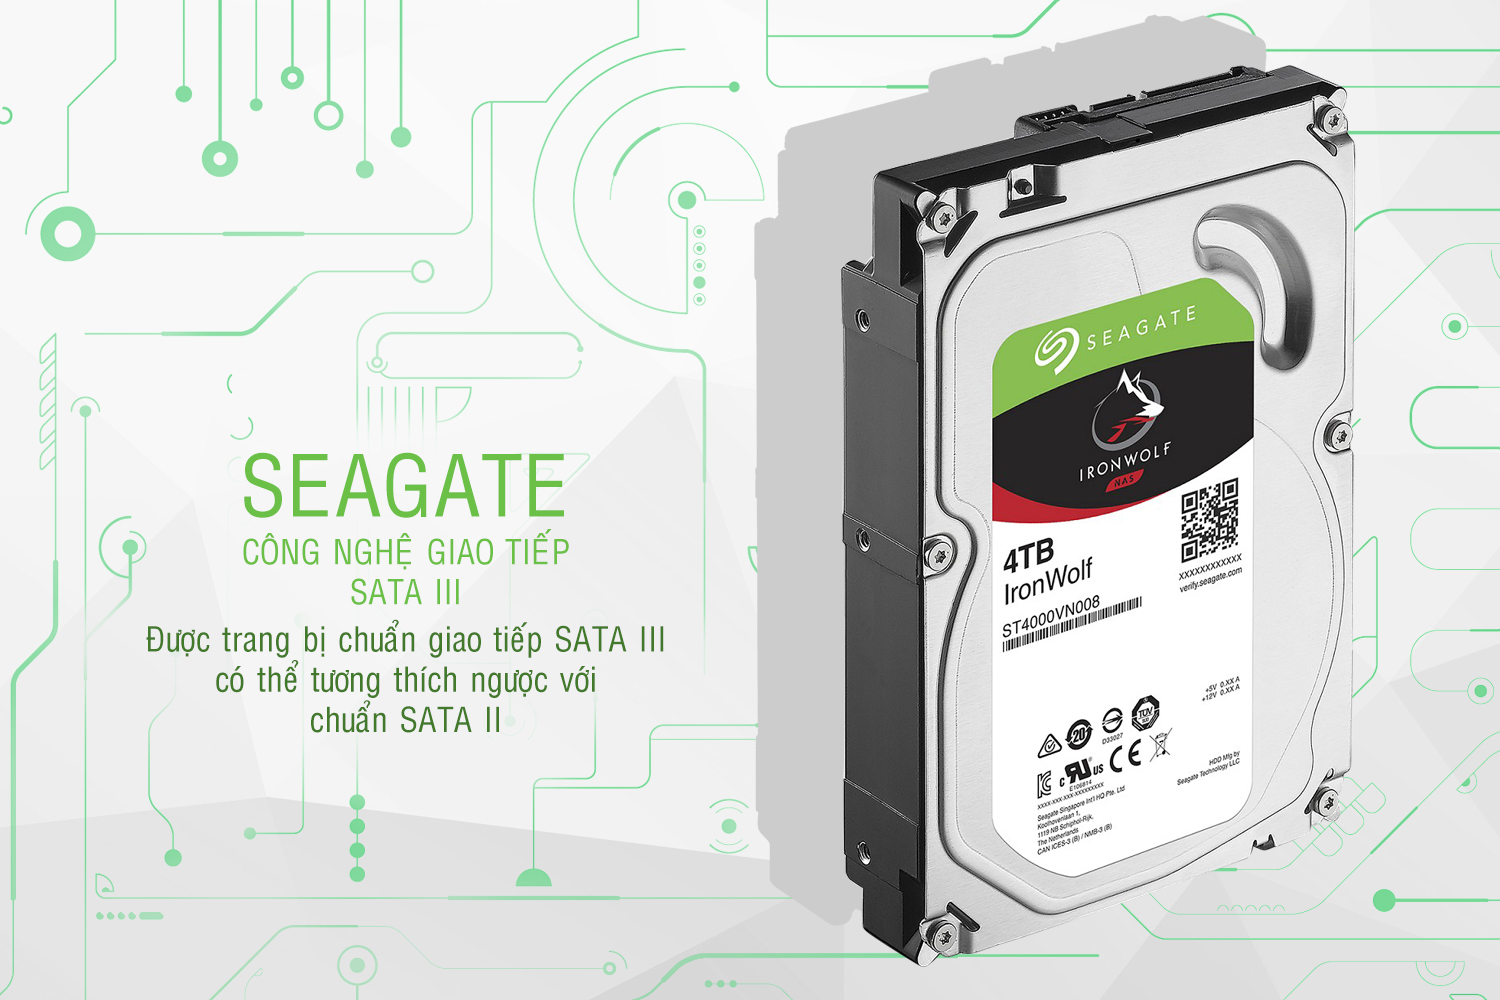 Ổ Cứng Trong Seagate IronWolf 4TB/64MB/3.5 - ST4000VN008